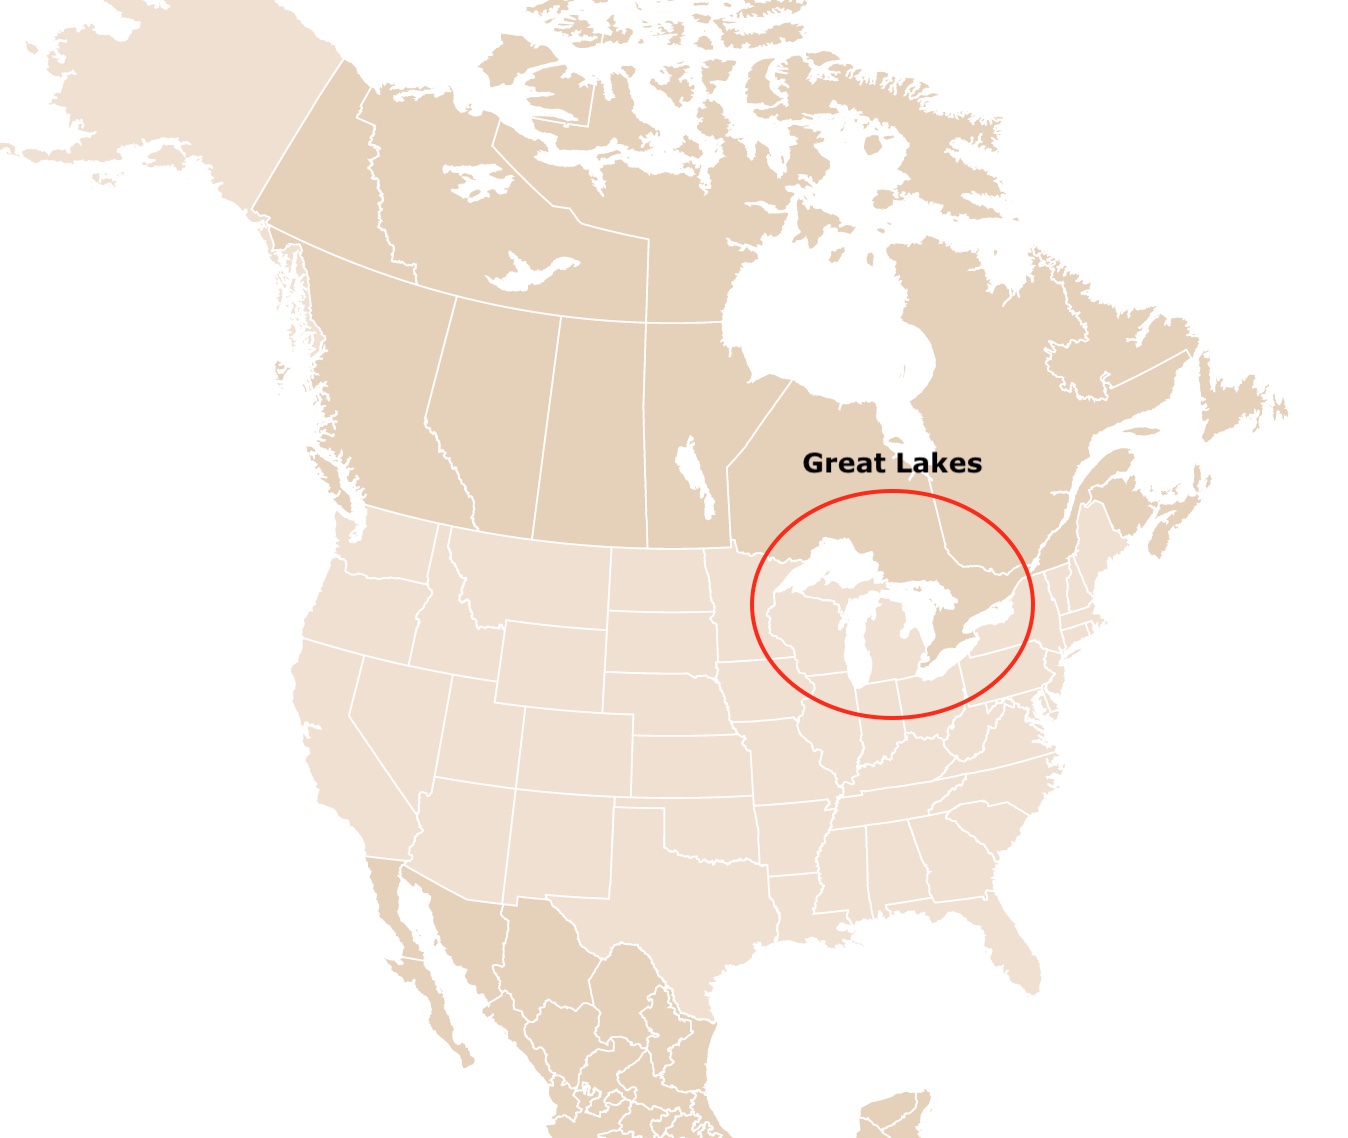 Location of the great lakes on a map